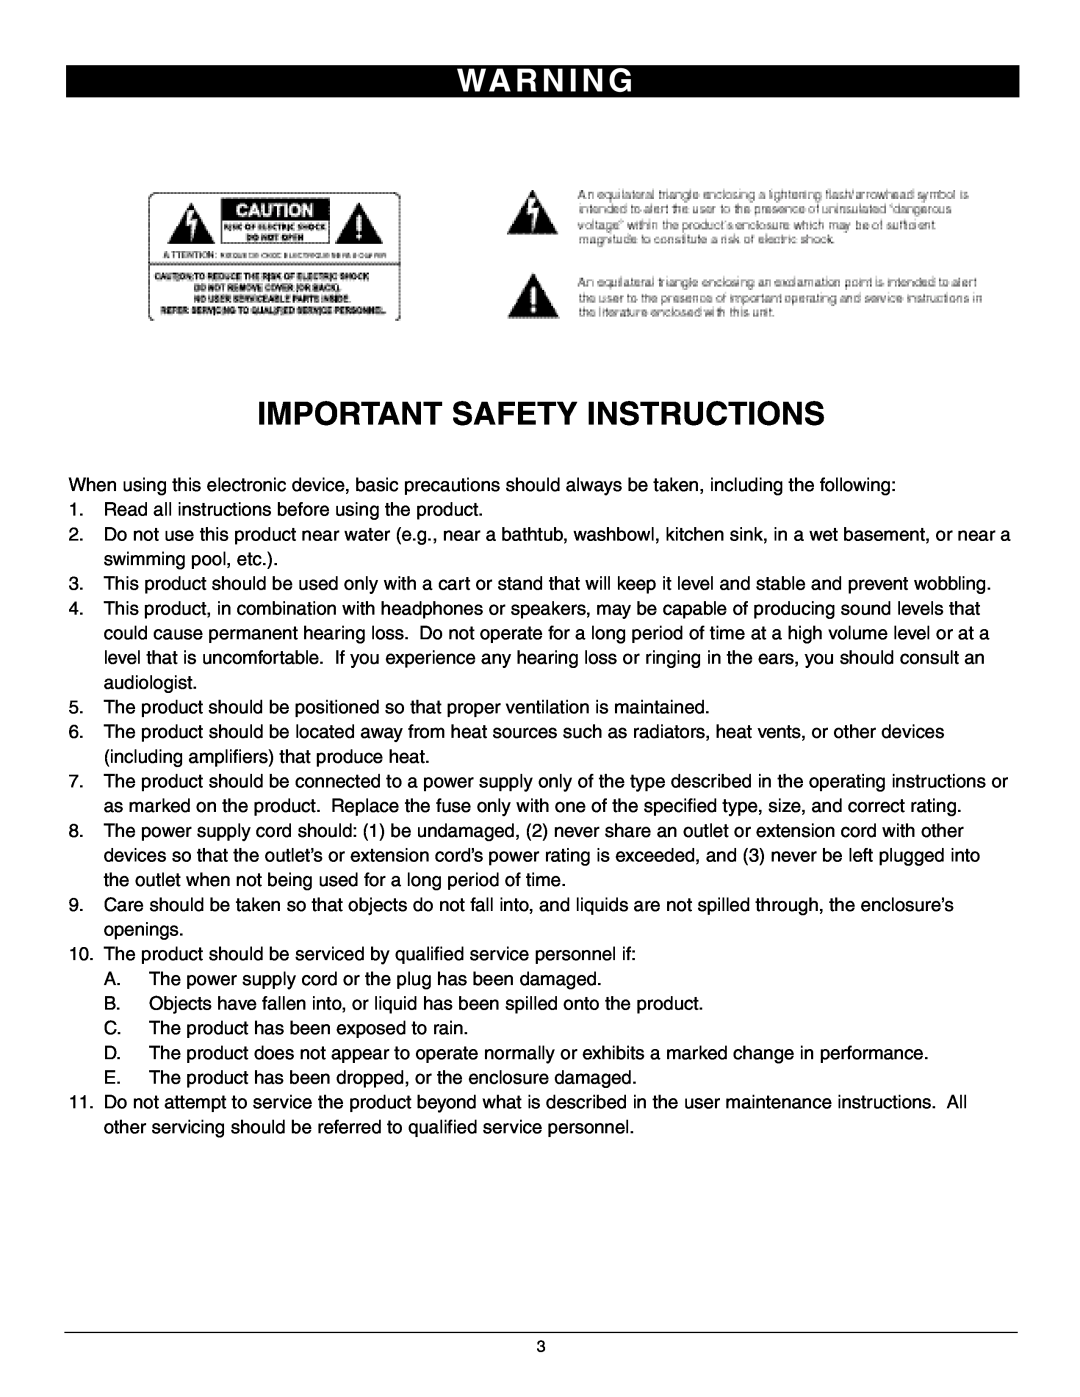 Nady Systems 3WA-1700 owner manual Wa R N I N G, Important Safety Instructions 